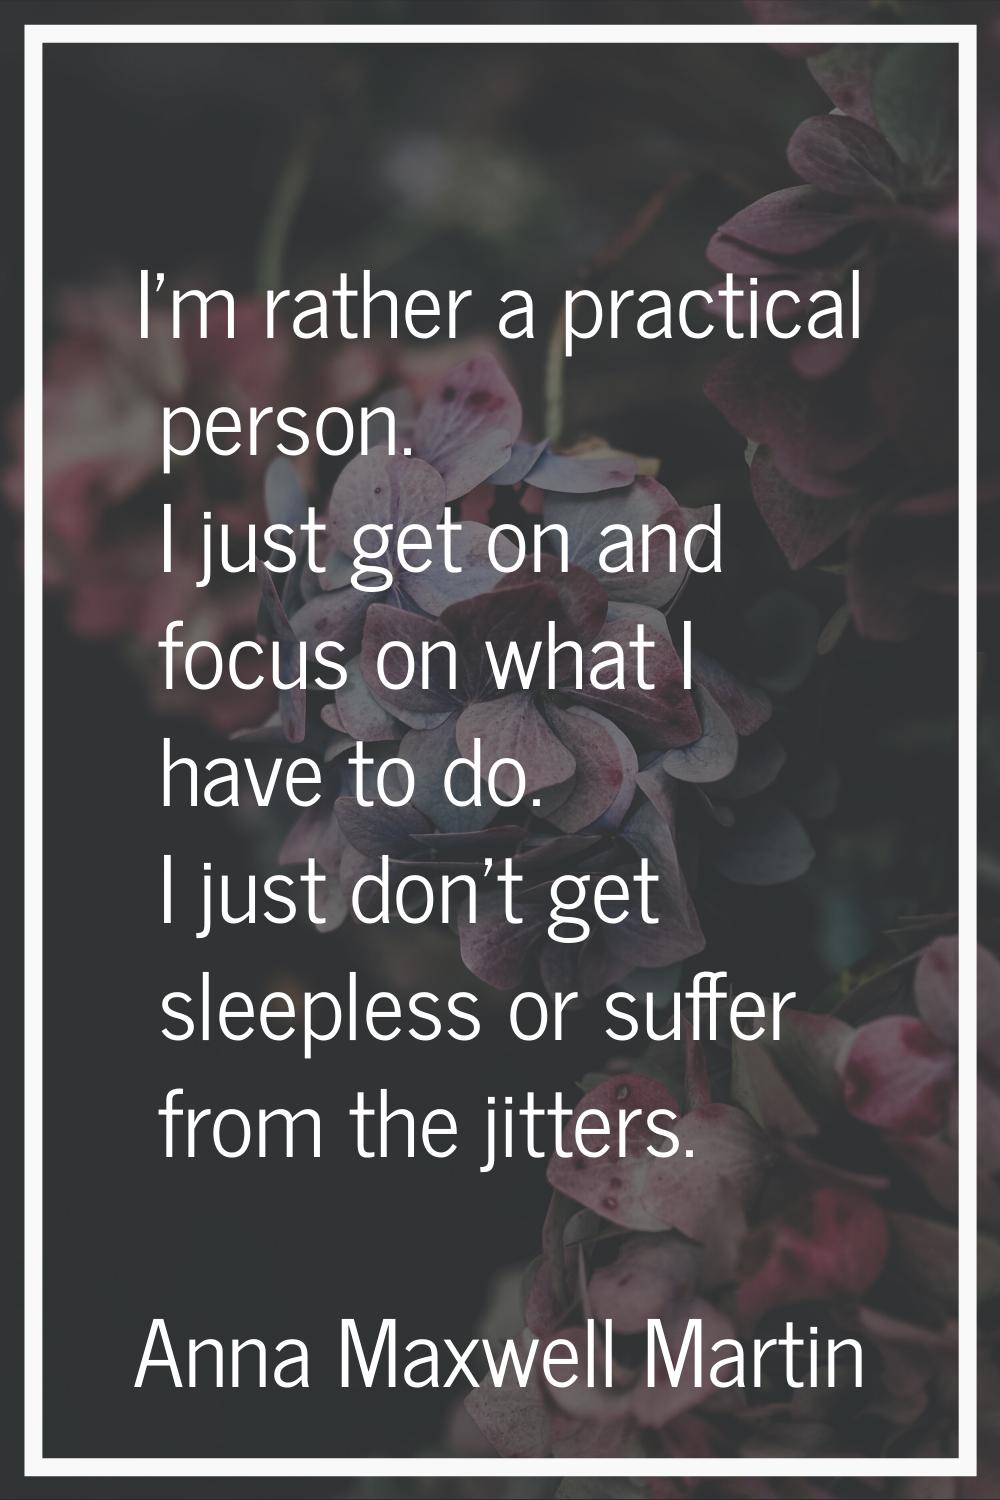 I'm rather a practical person. I just get on and focus on what I have to do. I just don't get sleep